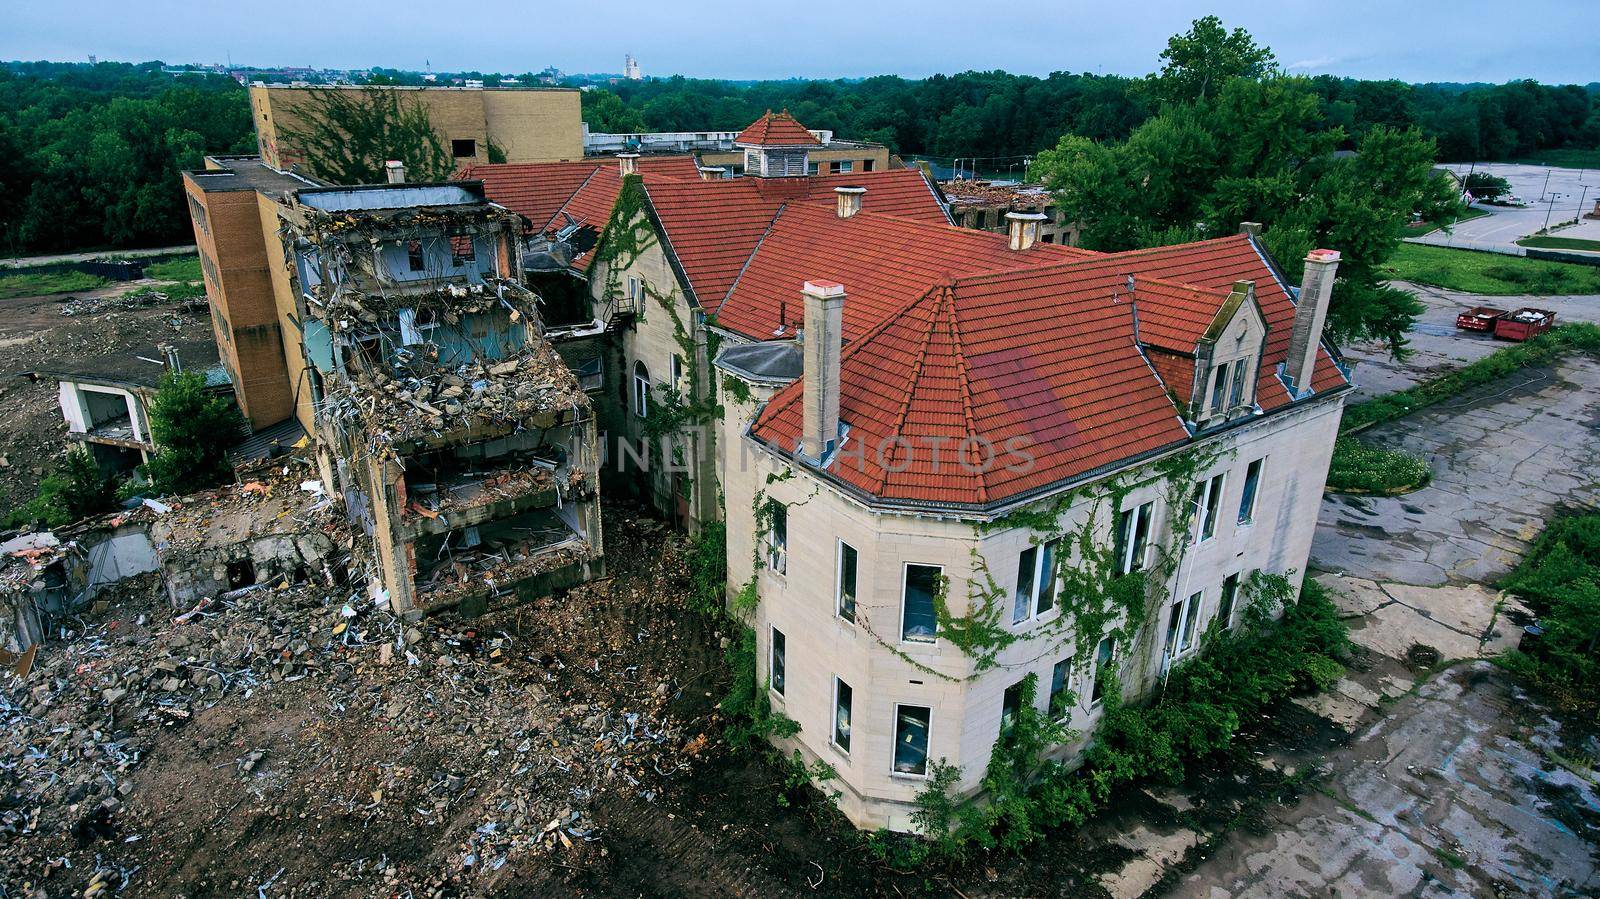 Aerial of large abandoned hospital completely falling apart by njproductions